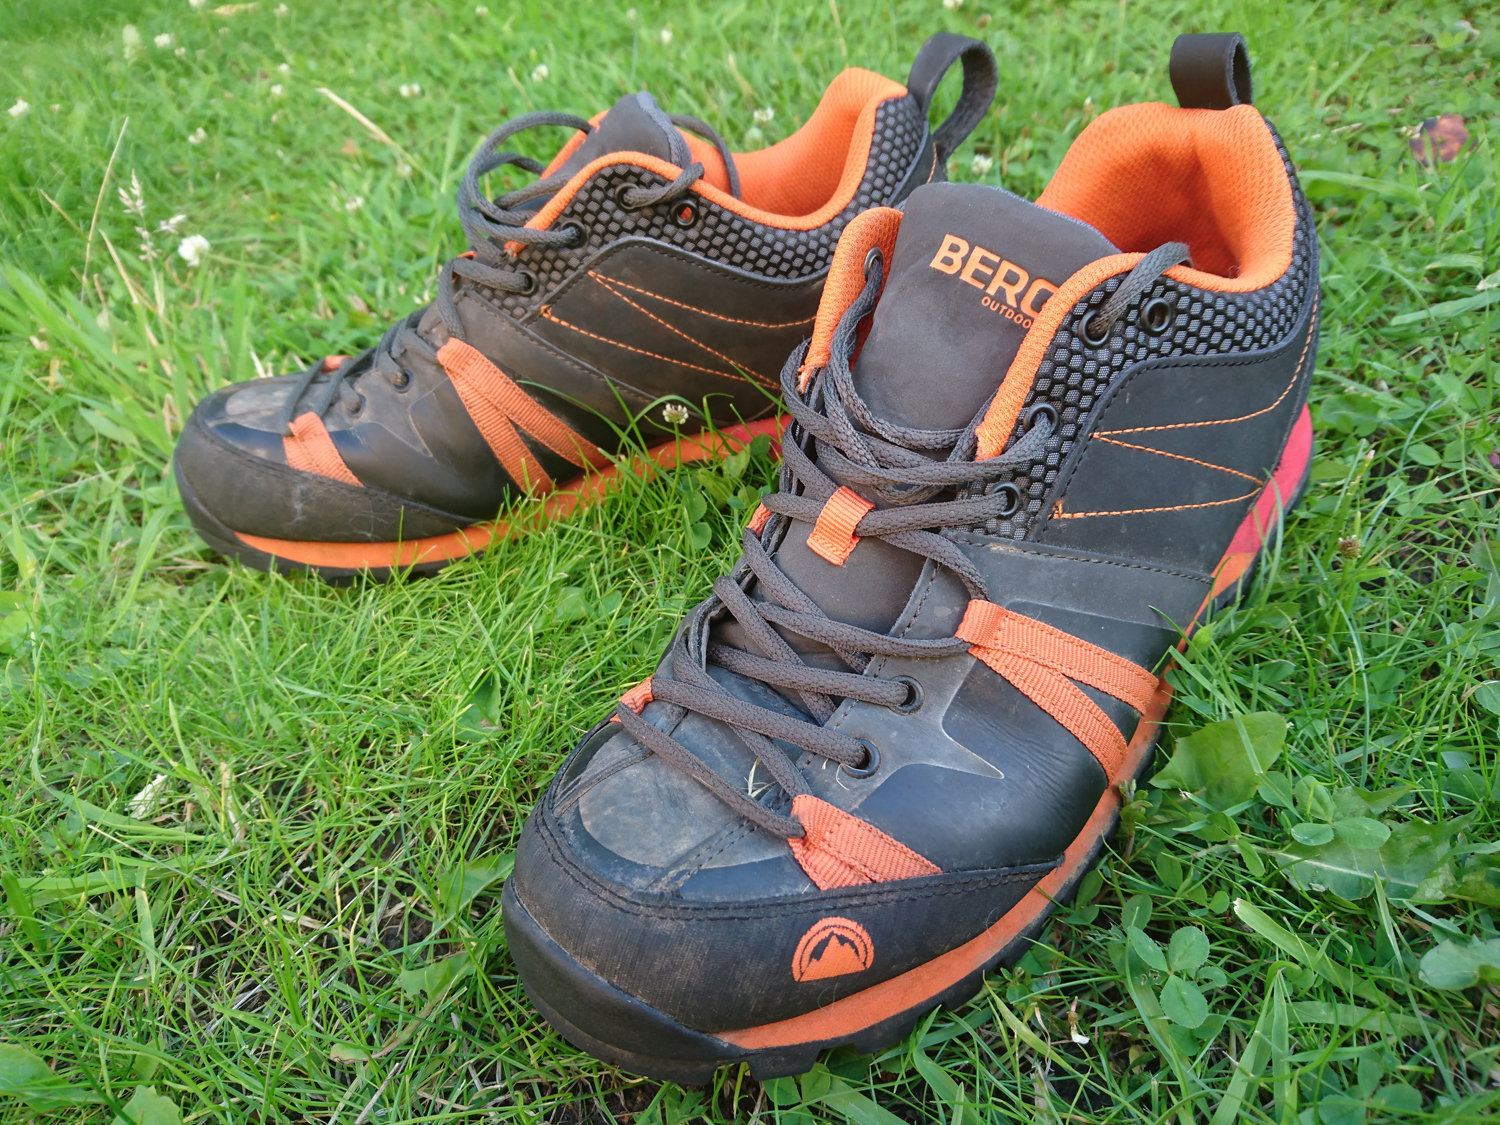 berg-outdoors-trainer-review02